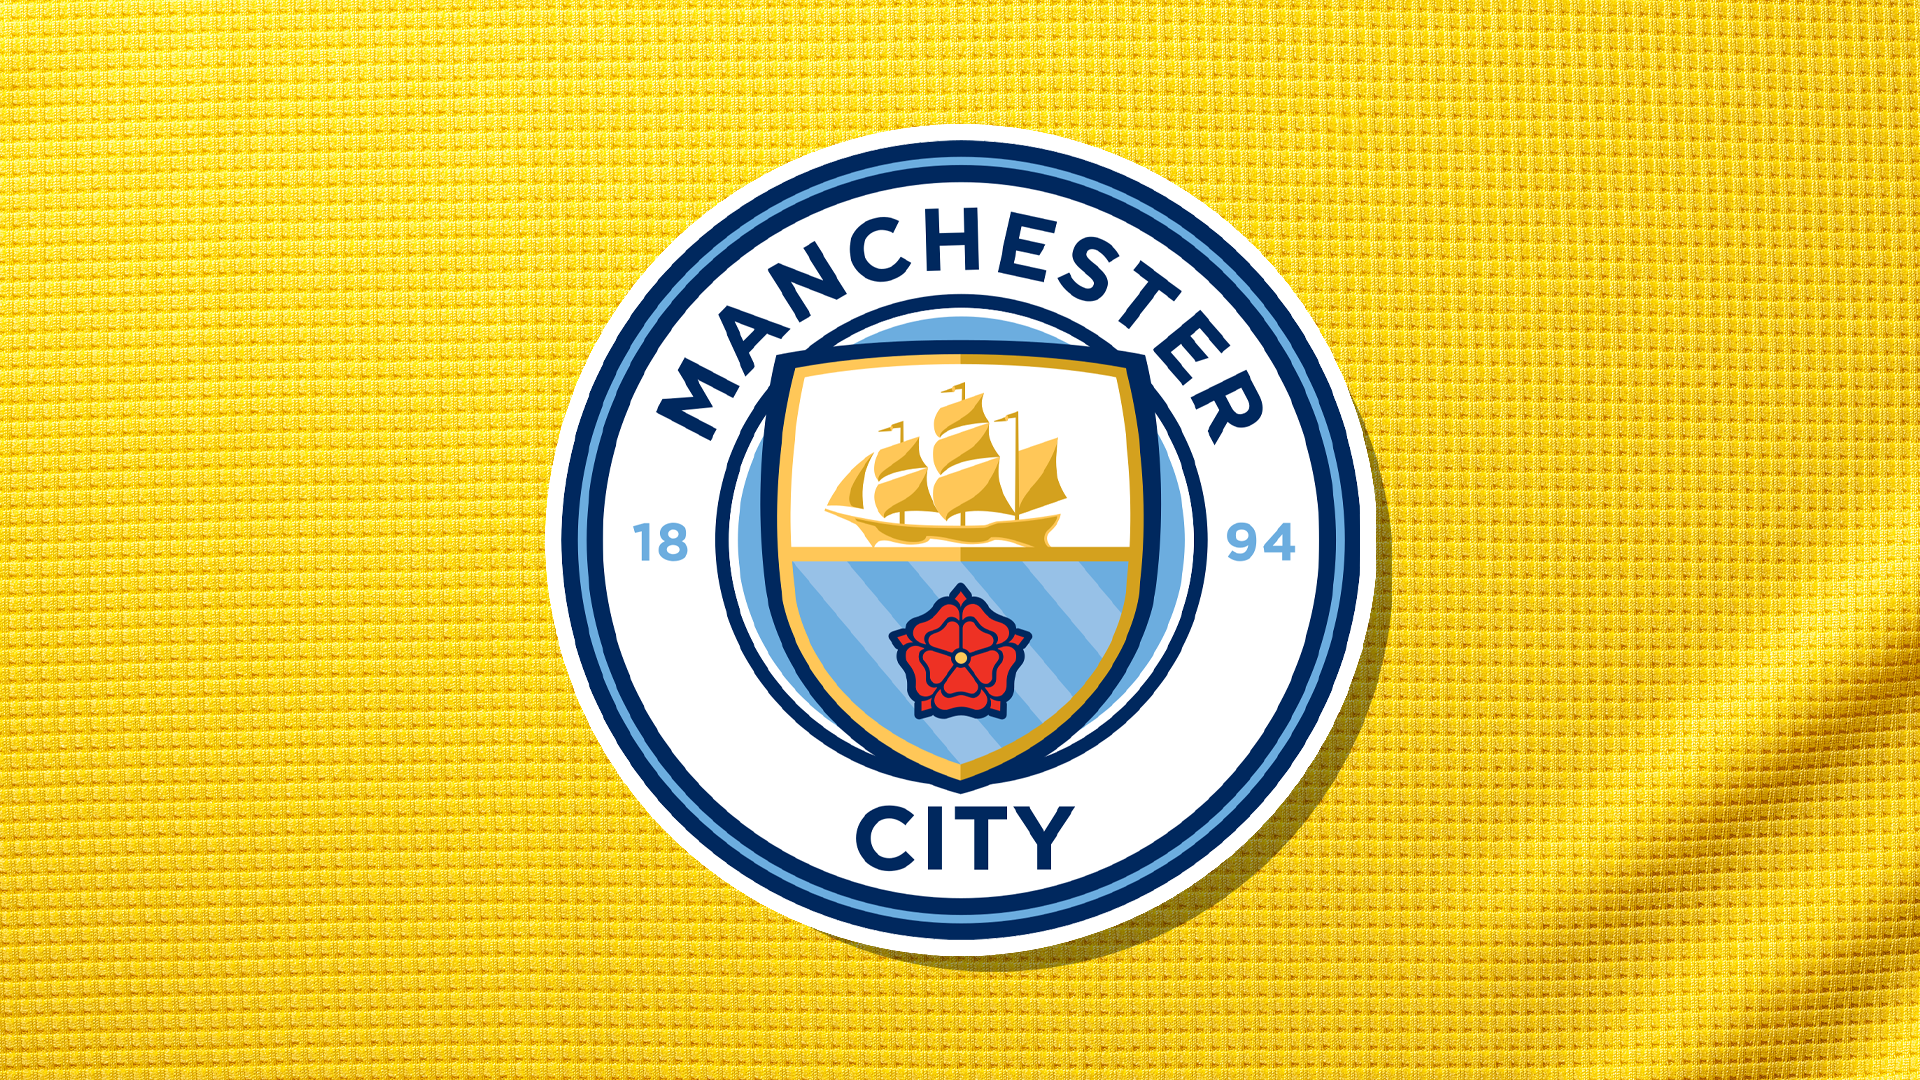 A Manchester City badge on a yellow shirt